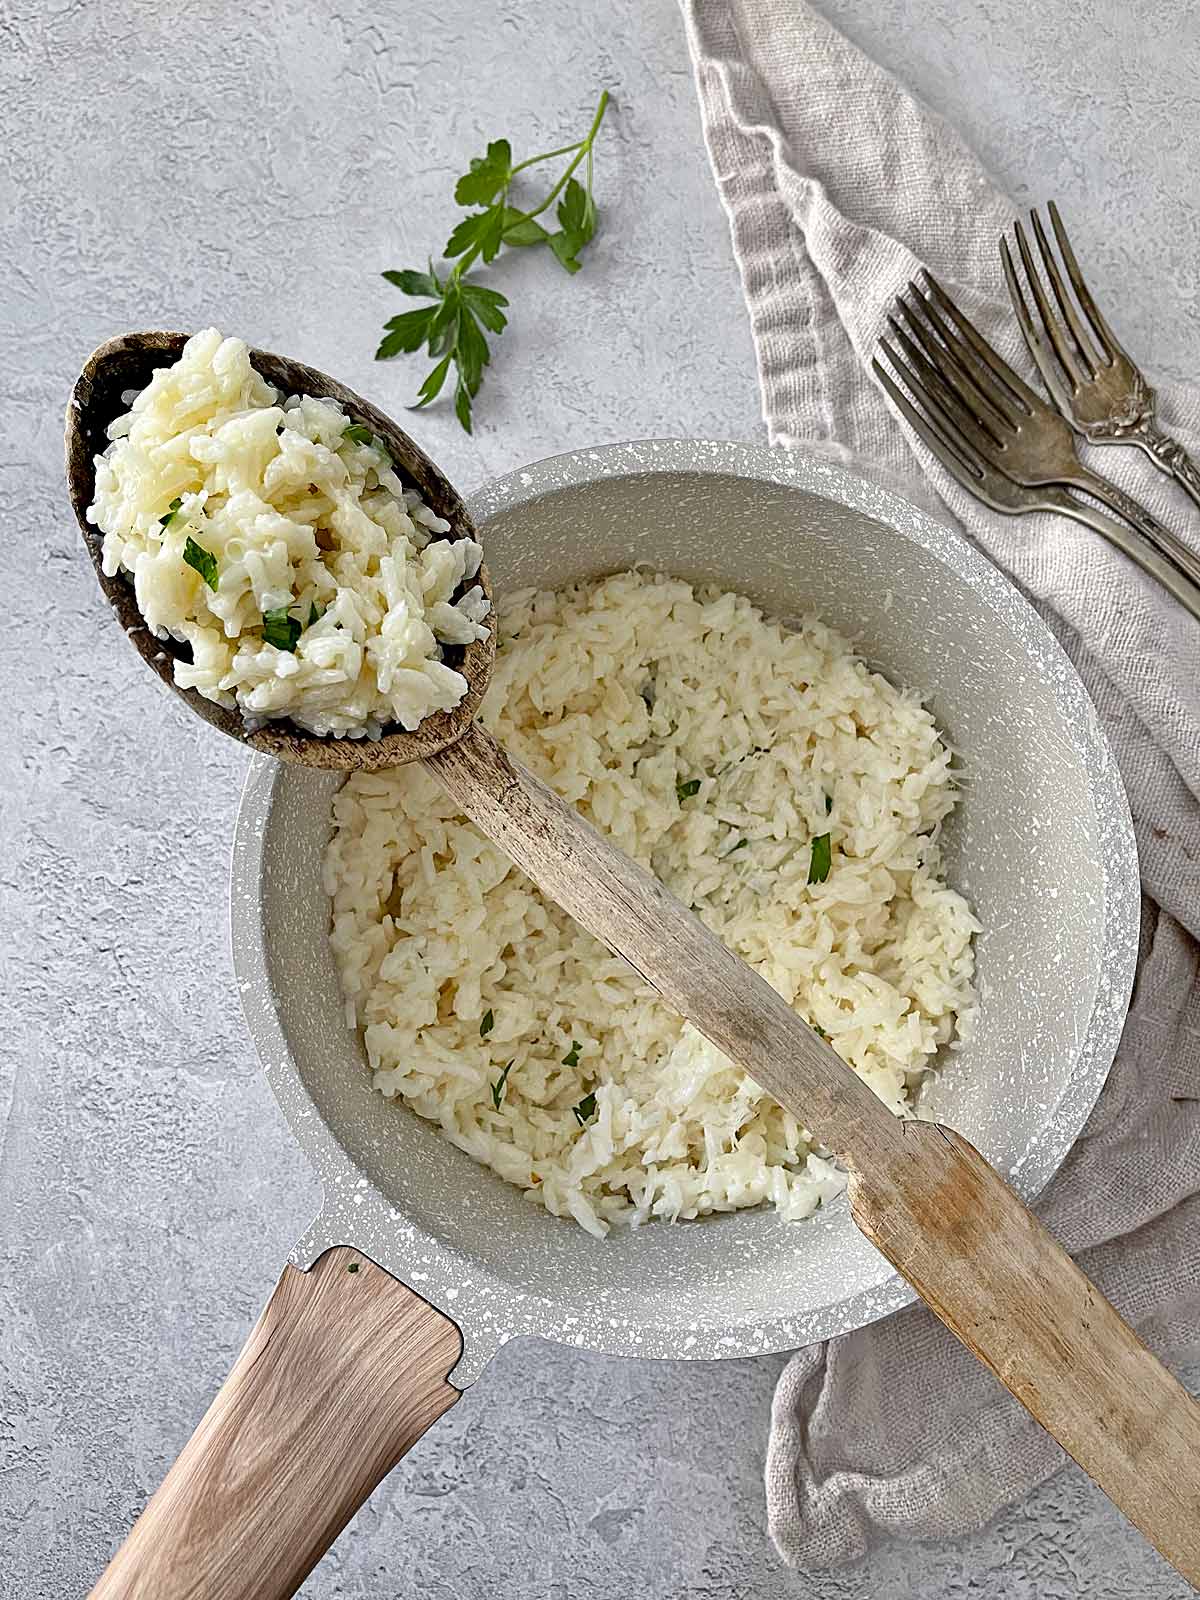 Bowl of cooked Creamy Parmesan Rice Recipe Copycat with a wooden spoon.